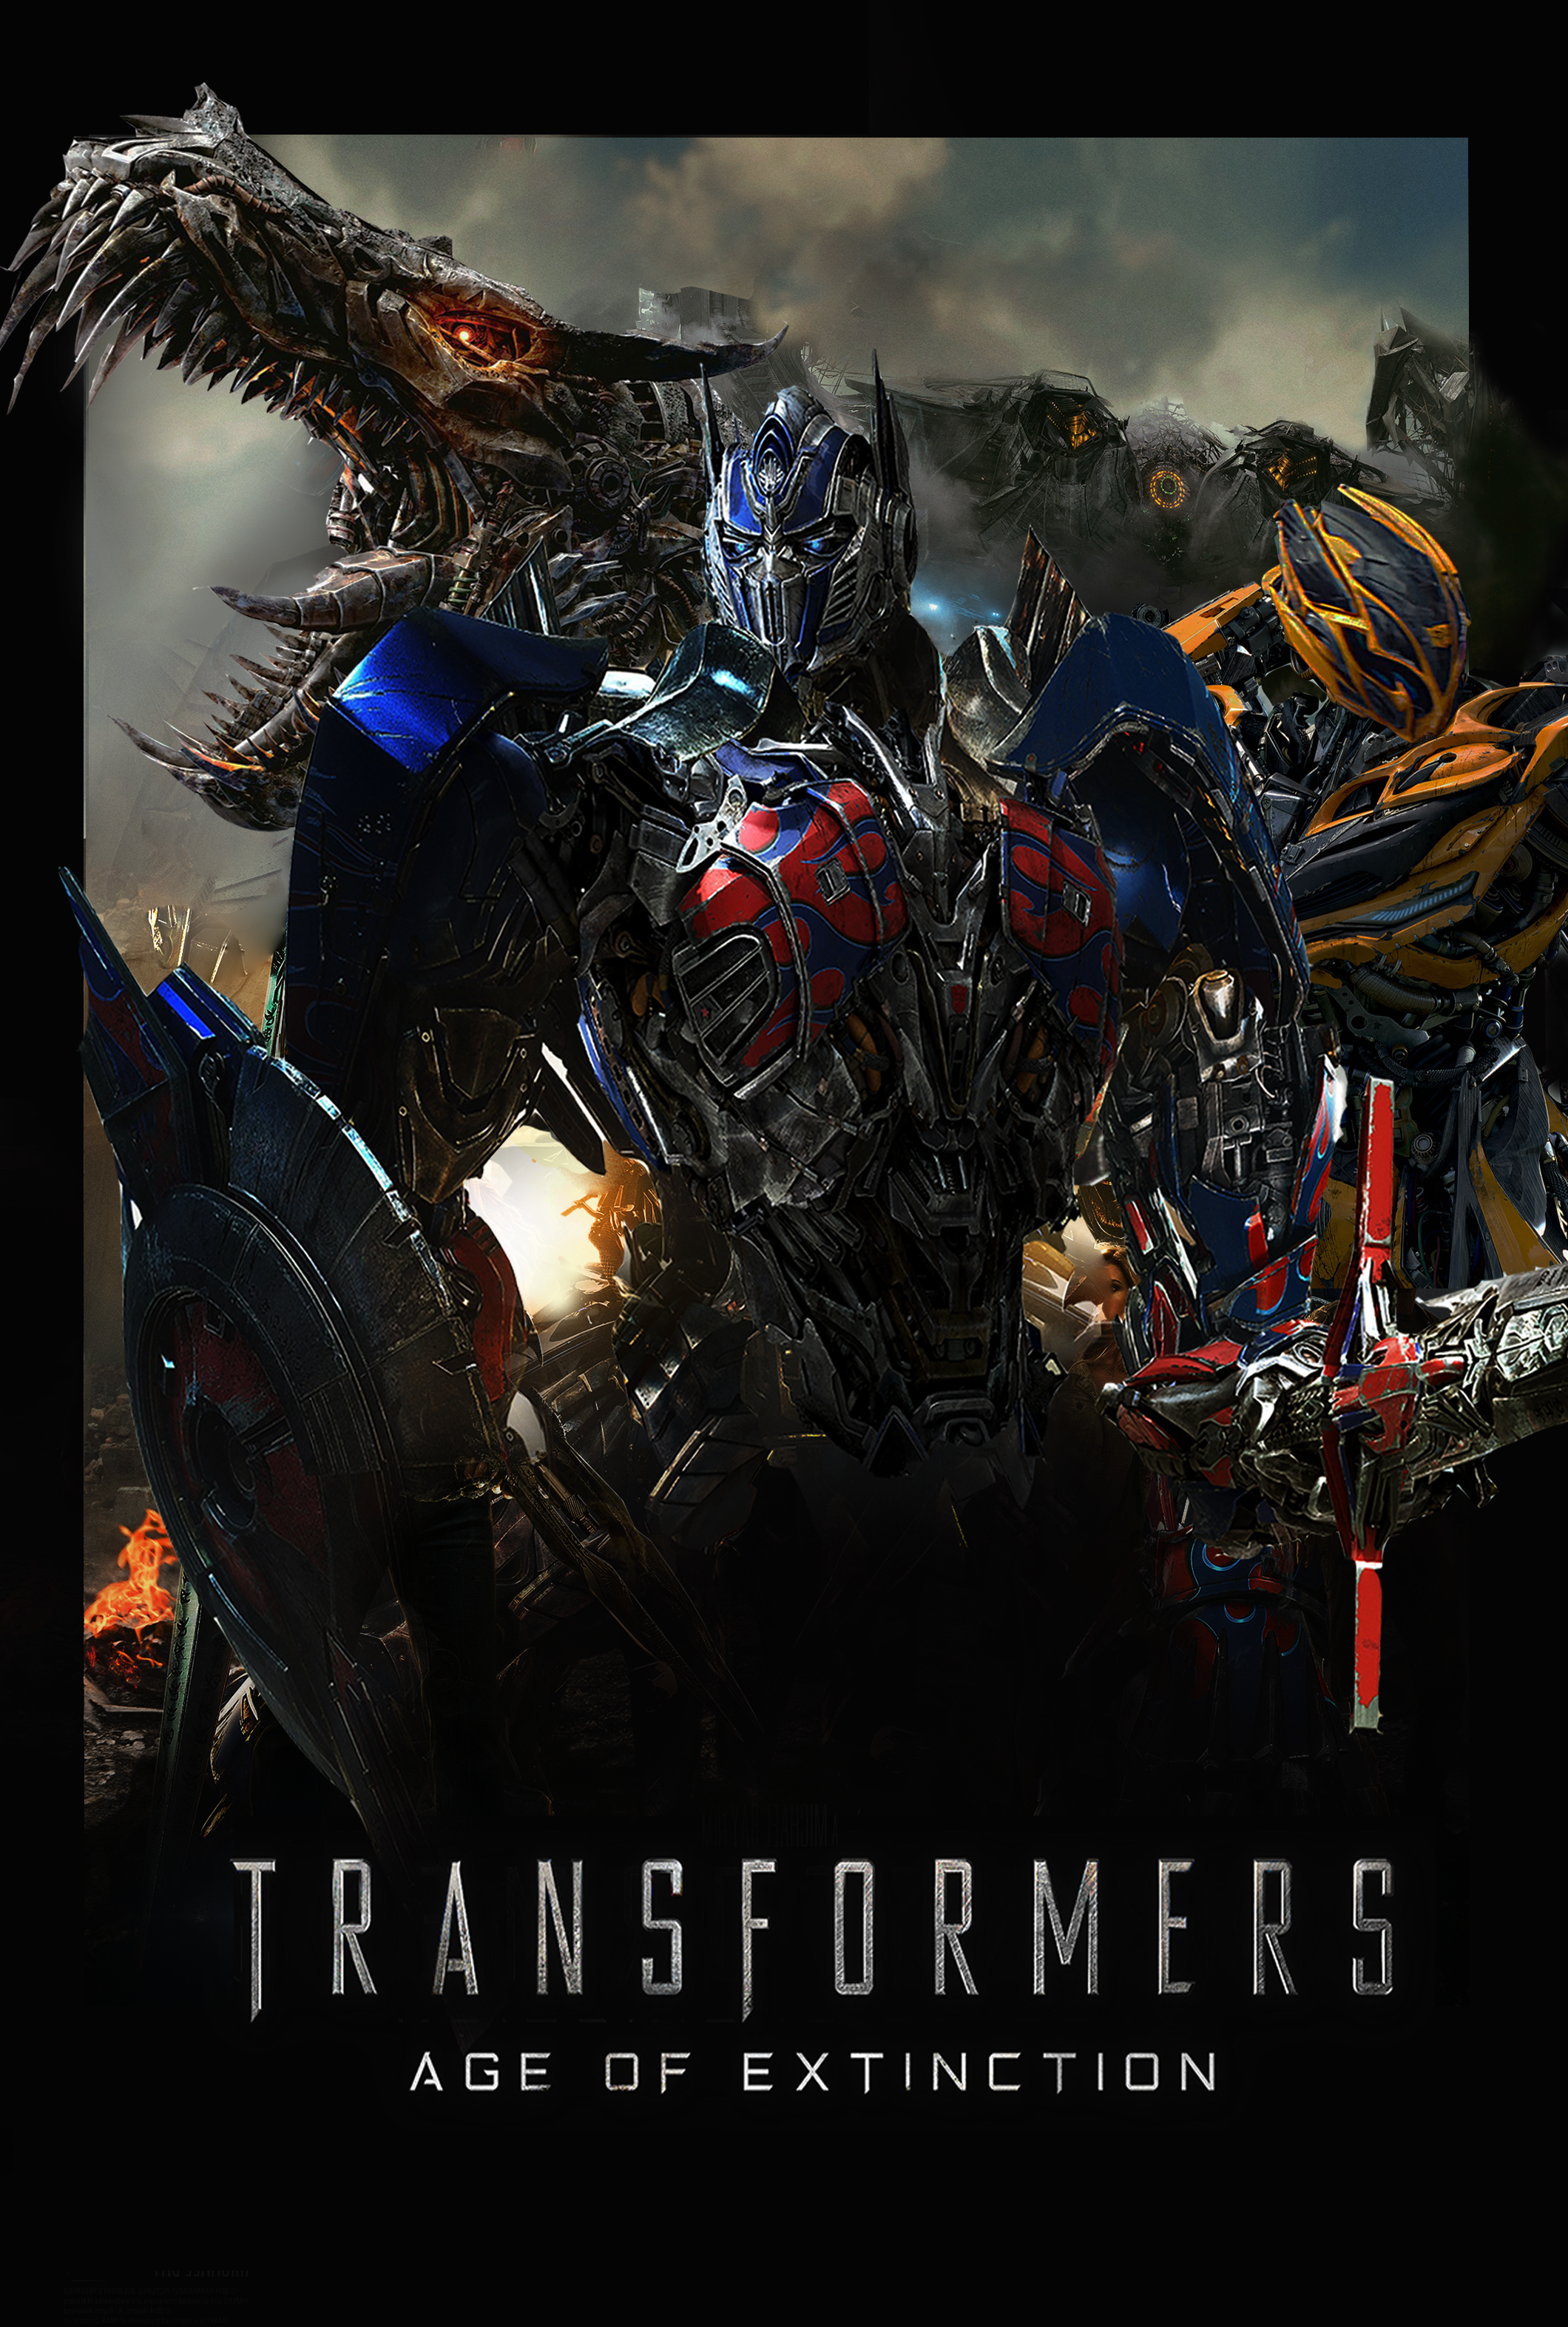 Transformers: Age of Extinction review | Film